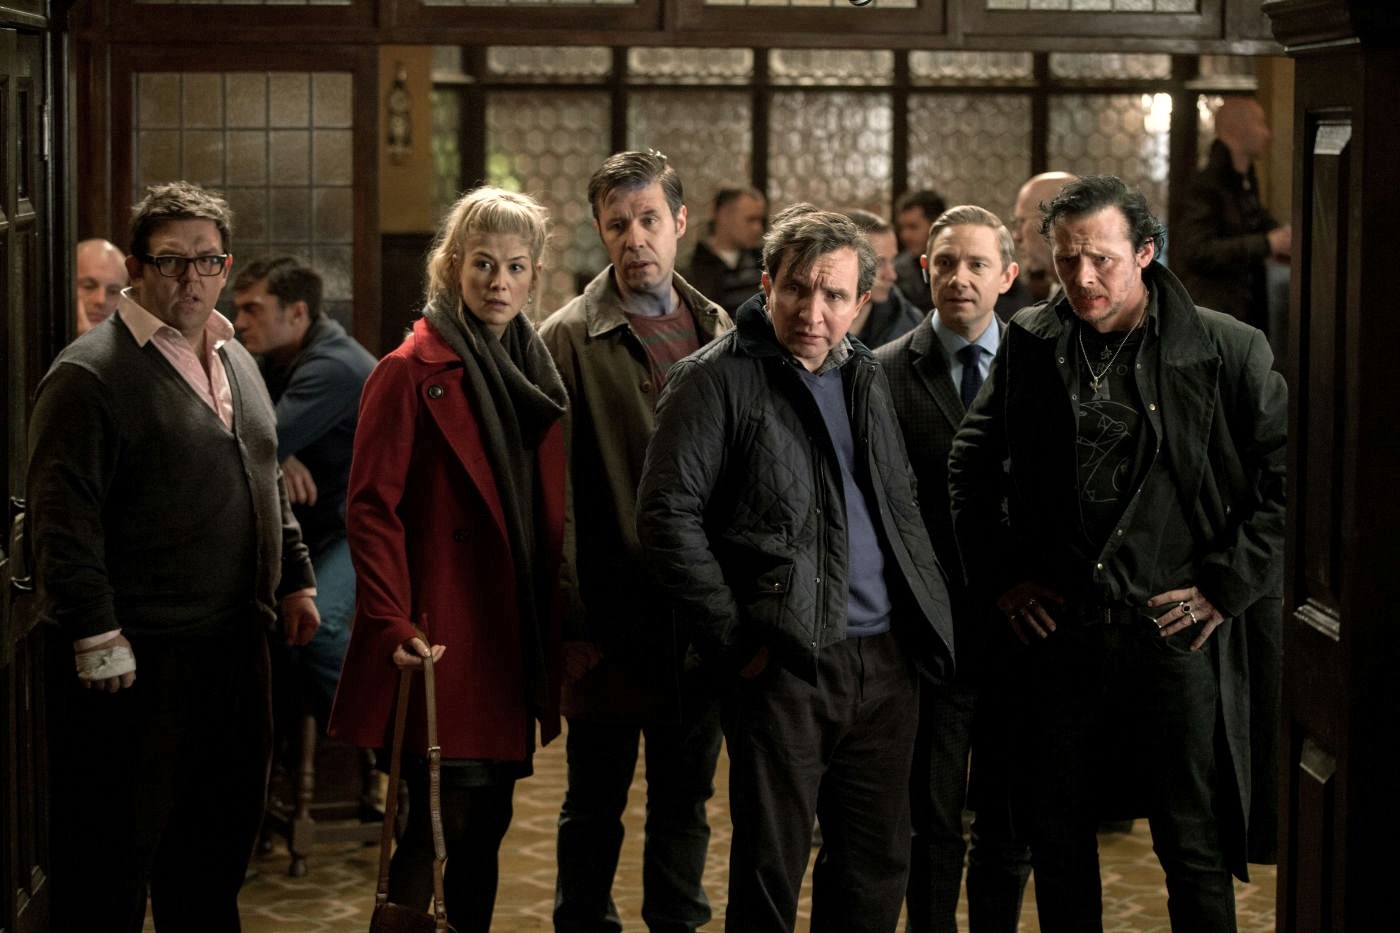 Nick Frost, Rosamund Pike, Paddy Considine, Eddie Marsan, Martin Freeman and Simon Pegg in Focus Features' The World's End (2013)